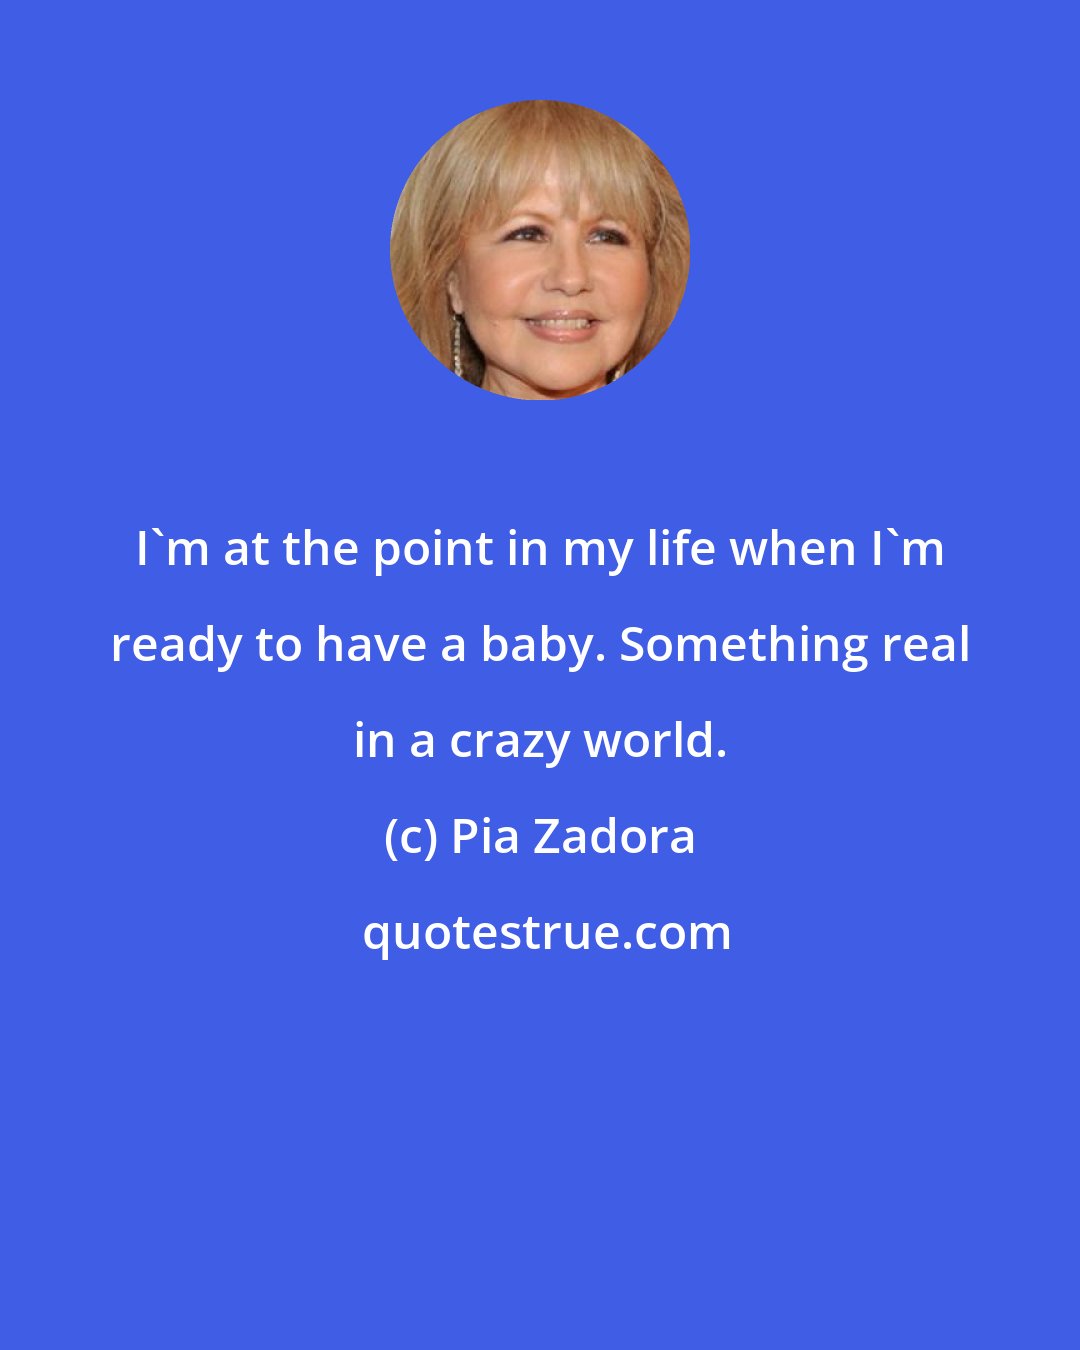 Pia Zadora: I'm at the point in my life when I'm ready to have a baby. Something real in a crazy world.